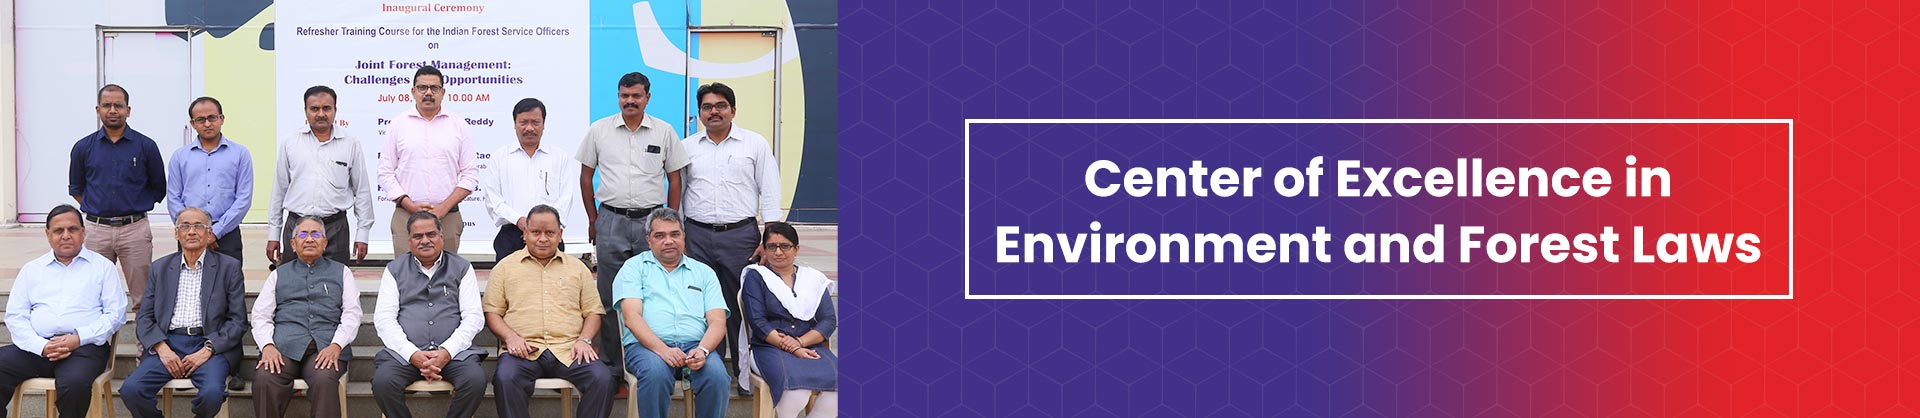 center-of-excellence-for-environmental-law